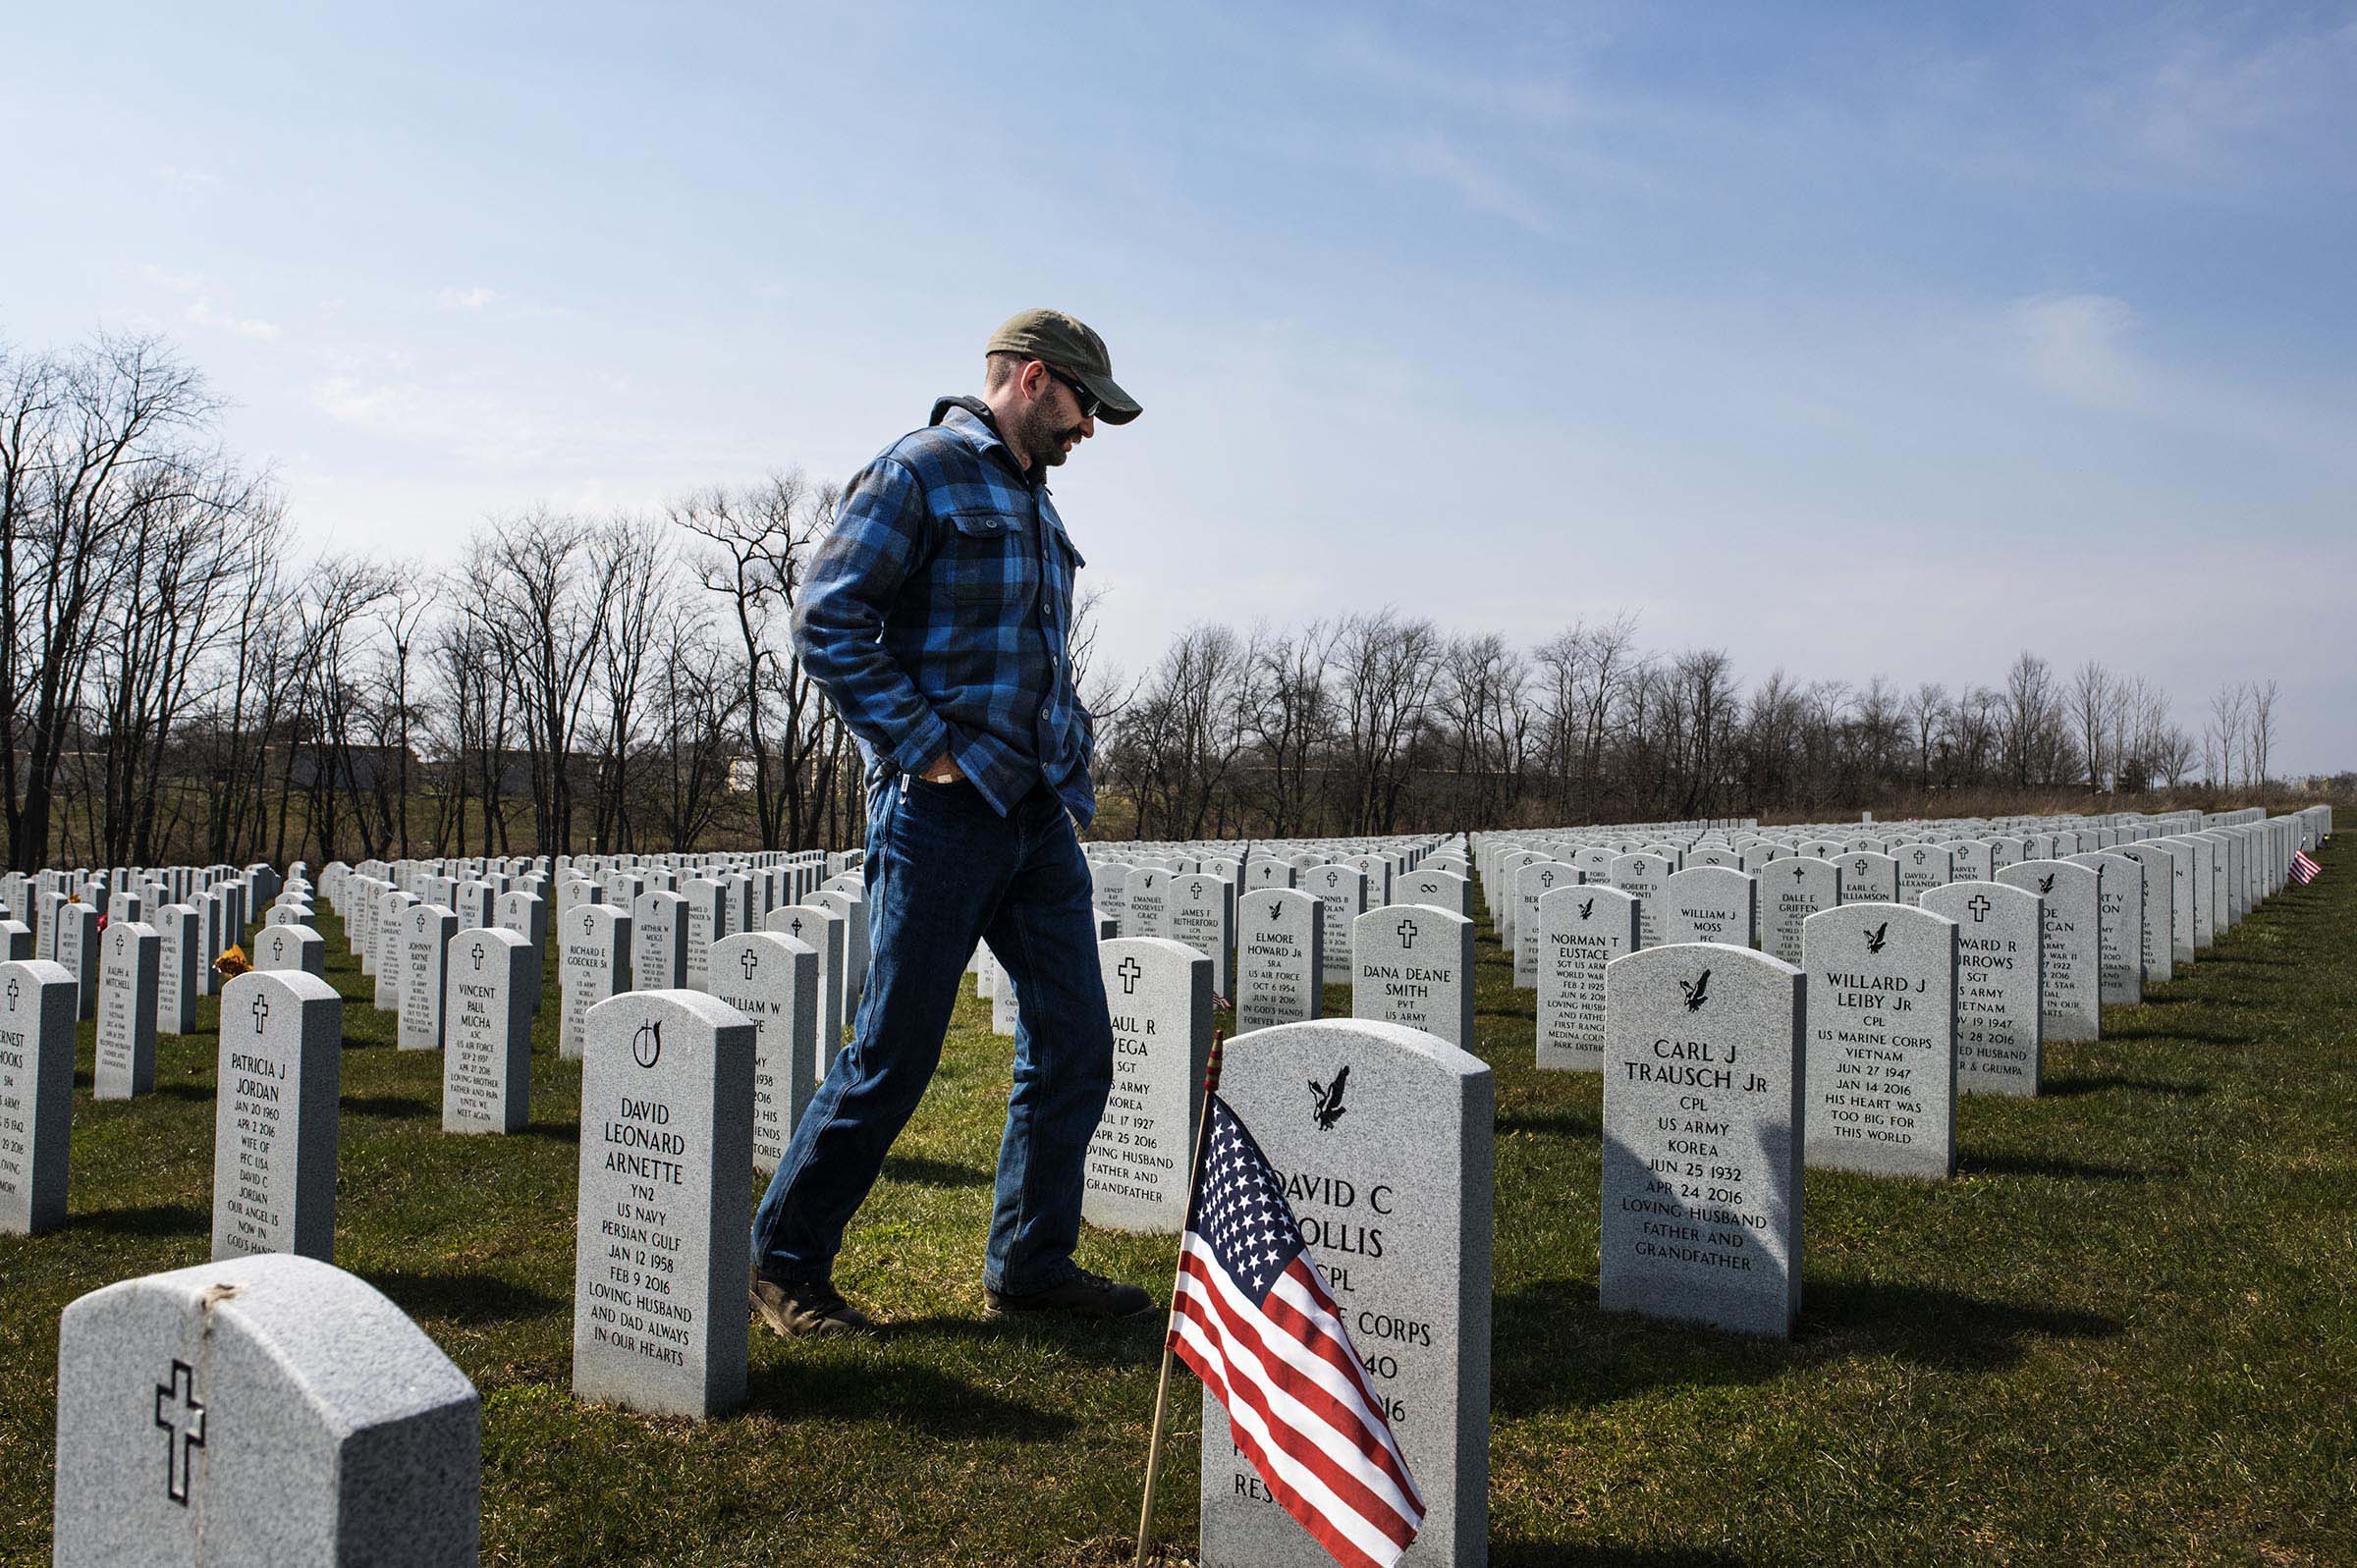  Adam walks through the Ohio Western Reserve National Cemetery in Seville, Ohio looking for his friend Coolhand's grave marker.